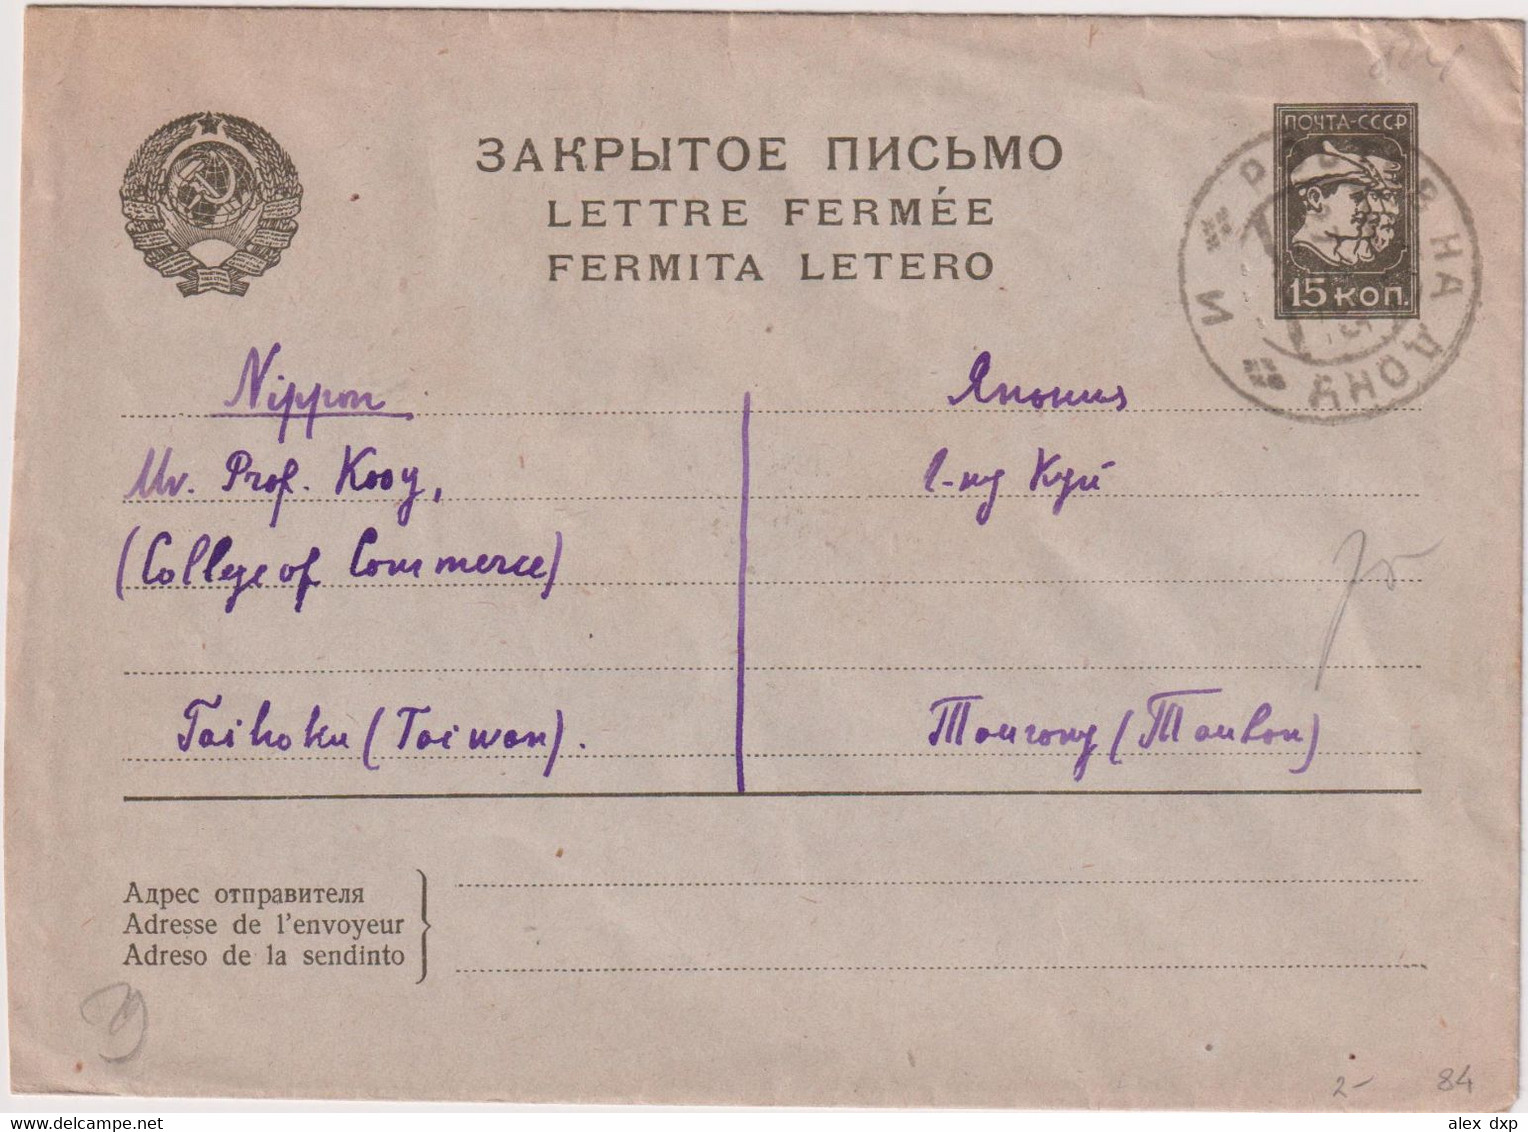 RUSSIA (USSR) > 1935 POSTAL HISTORY > CLOSED LETTER STATIONARY COVER TO TAIWAN (PERIOD OF JAPANESE OCCUPATION) - Brieven En Documenten